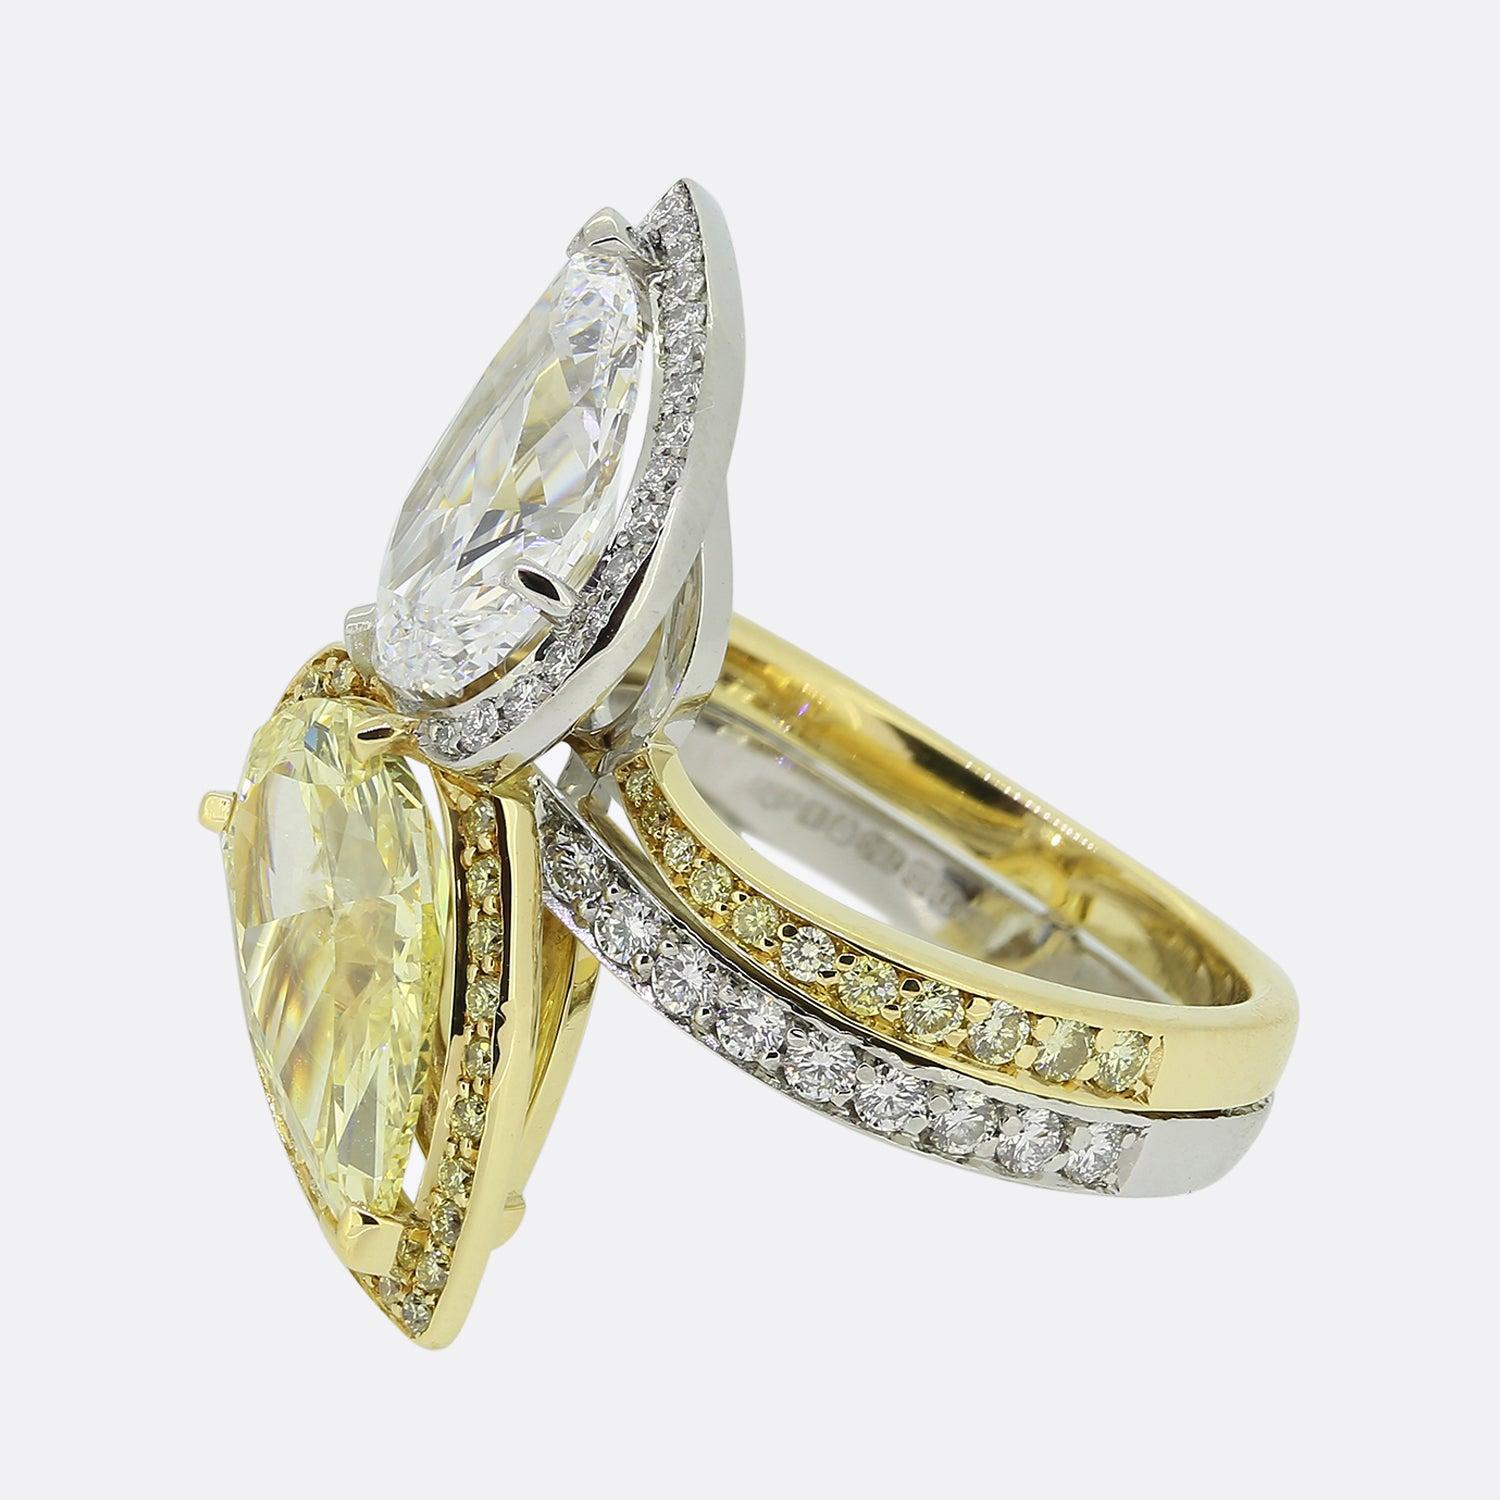 This is a truly wonderful ring from the luxury jewellery designer Boodles. The ring is crafted in 18ct white and yellow gold and features a 2.43 carat fancy intense yellow diamond and a stunning 2.34 carat D coloured diamond. The ring forms part of